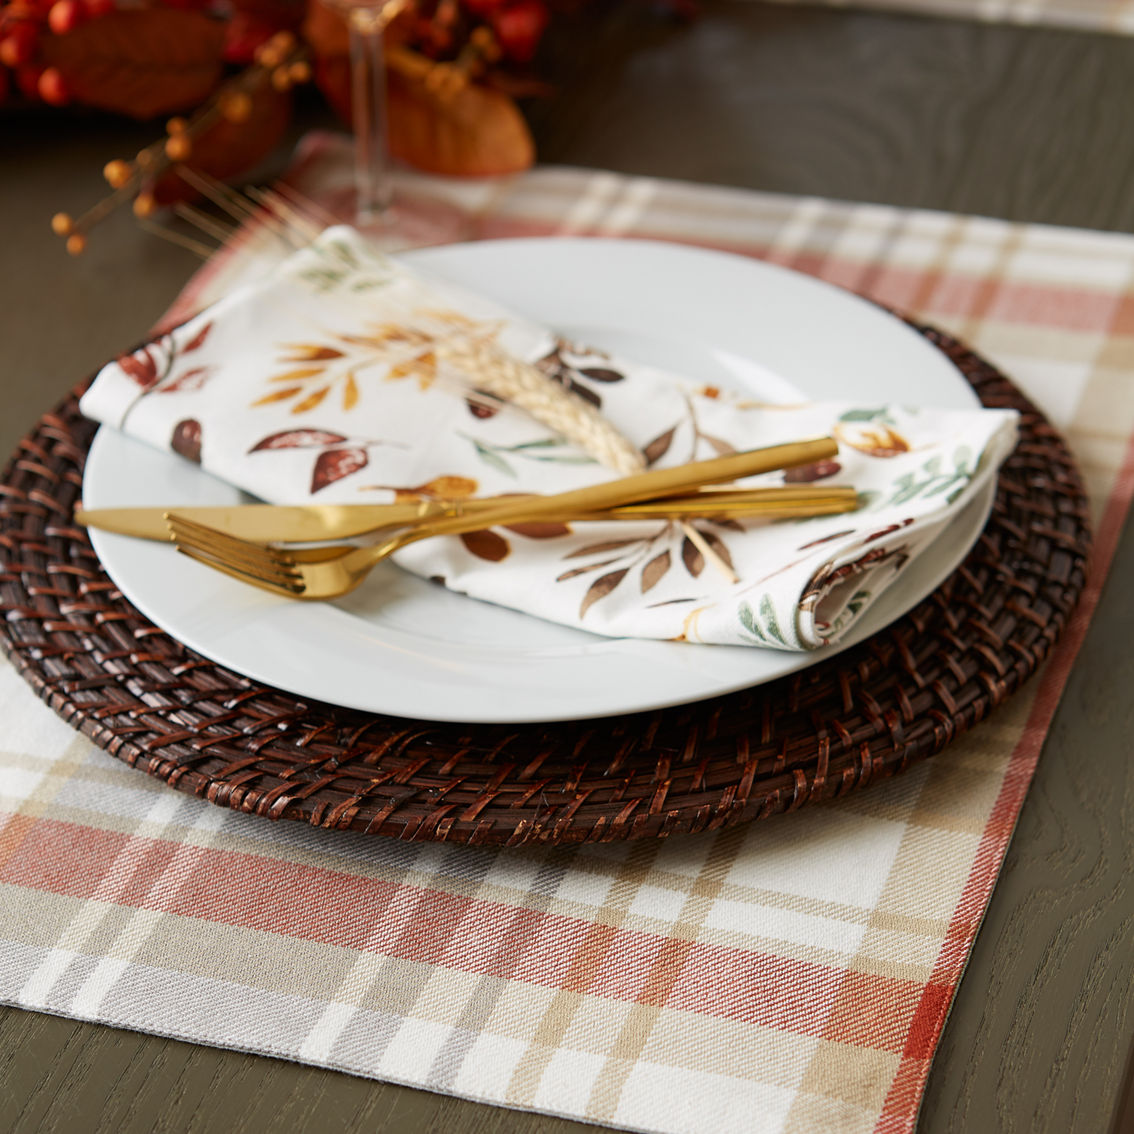 Design Imports Thankful Reversible Placemats, Set of 4 - Image 8 of 9